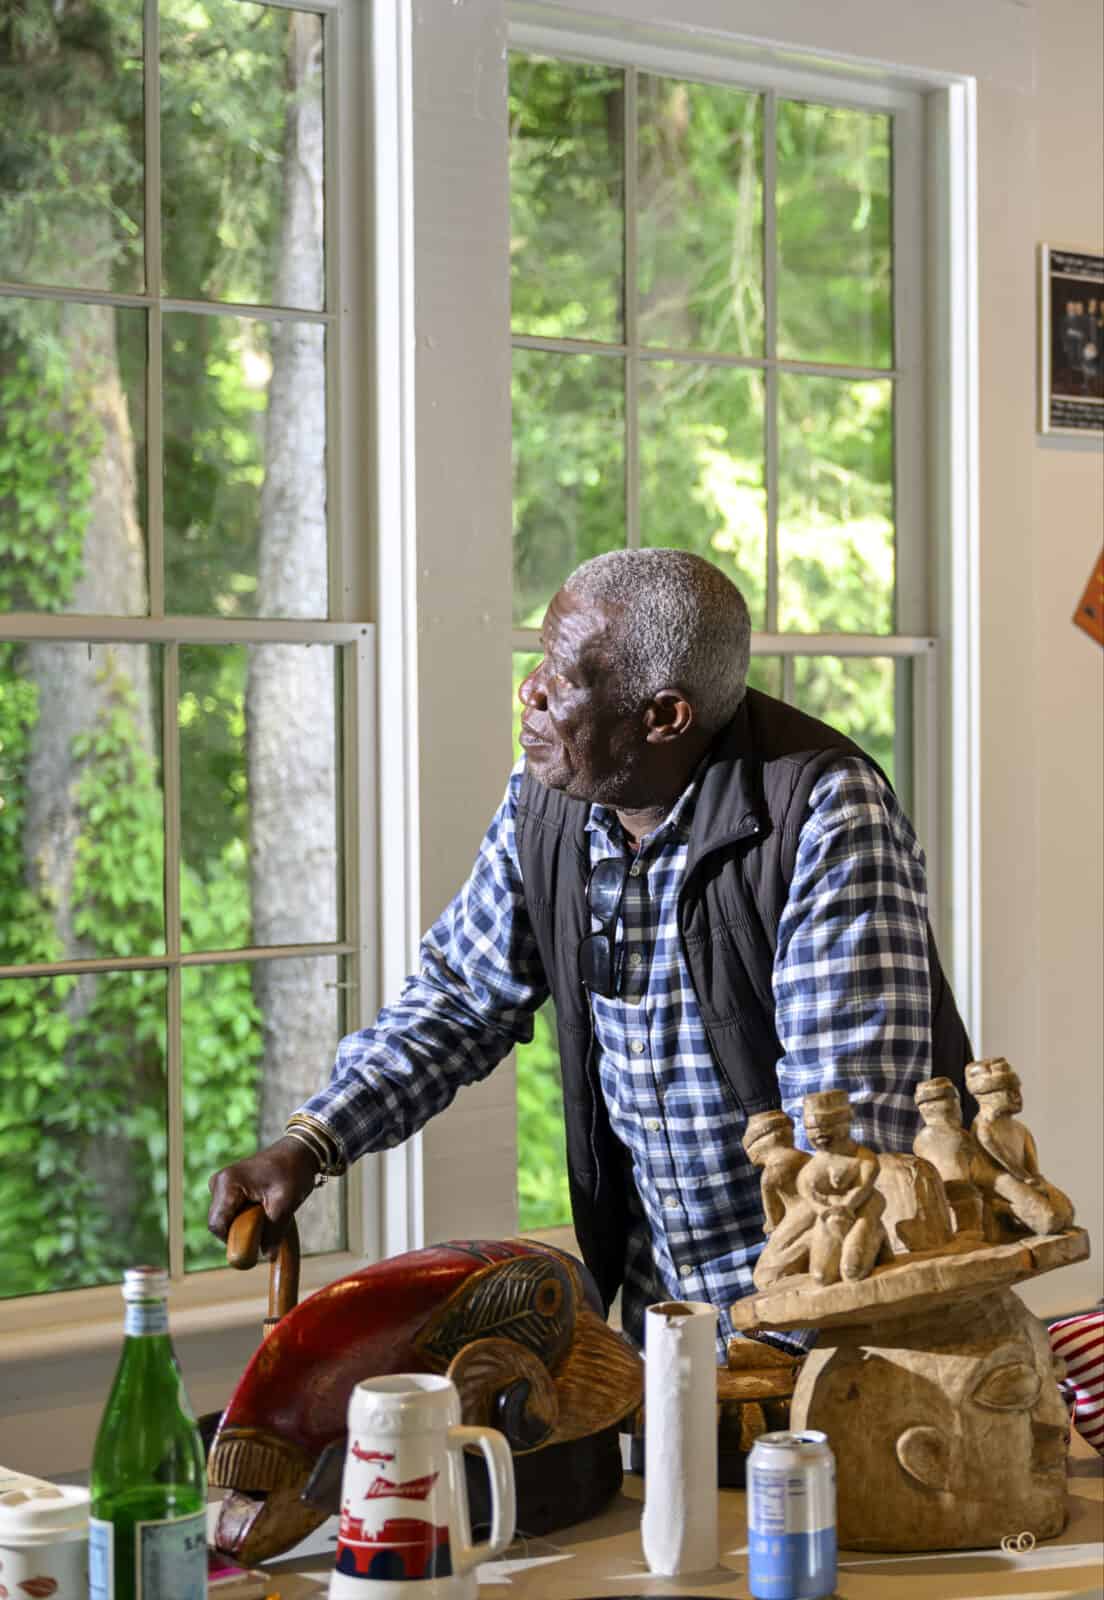 Internationally acclaimed artist Georges Adéagbo looks around the Morris Studio as he creates a site-specific art installation. Press photo courtesy of Chesterwood.